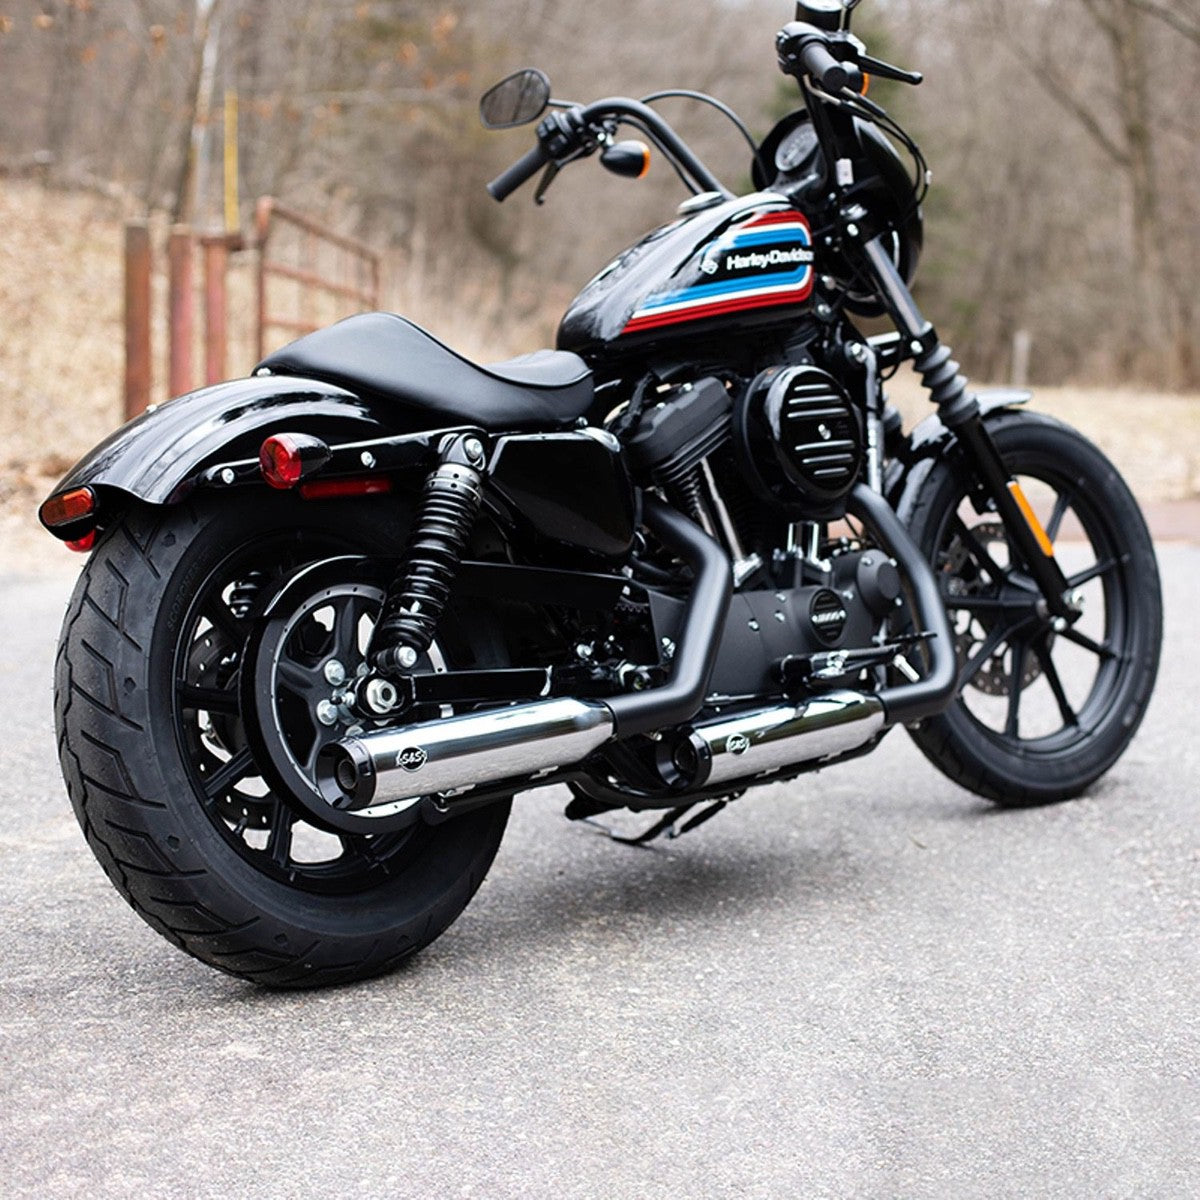 S&S exhaust system on Harley-Davidson Sportster